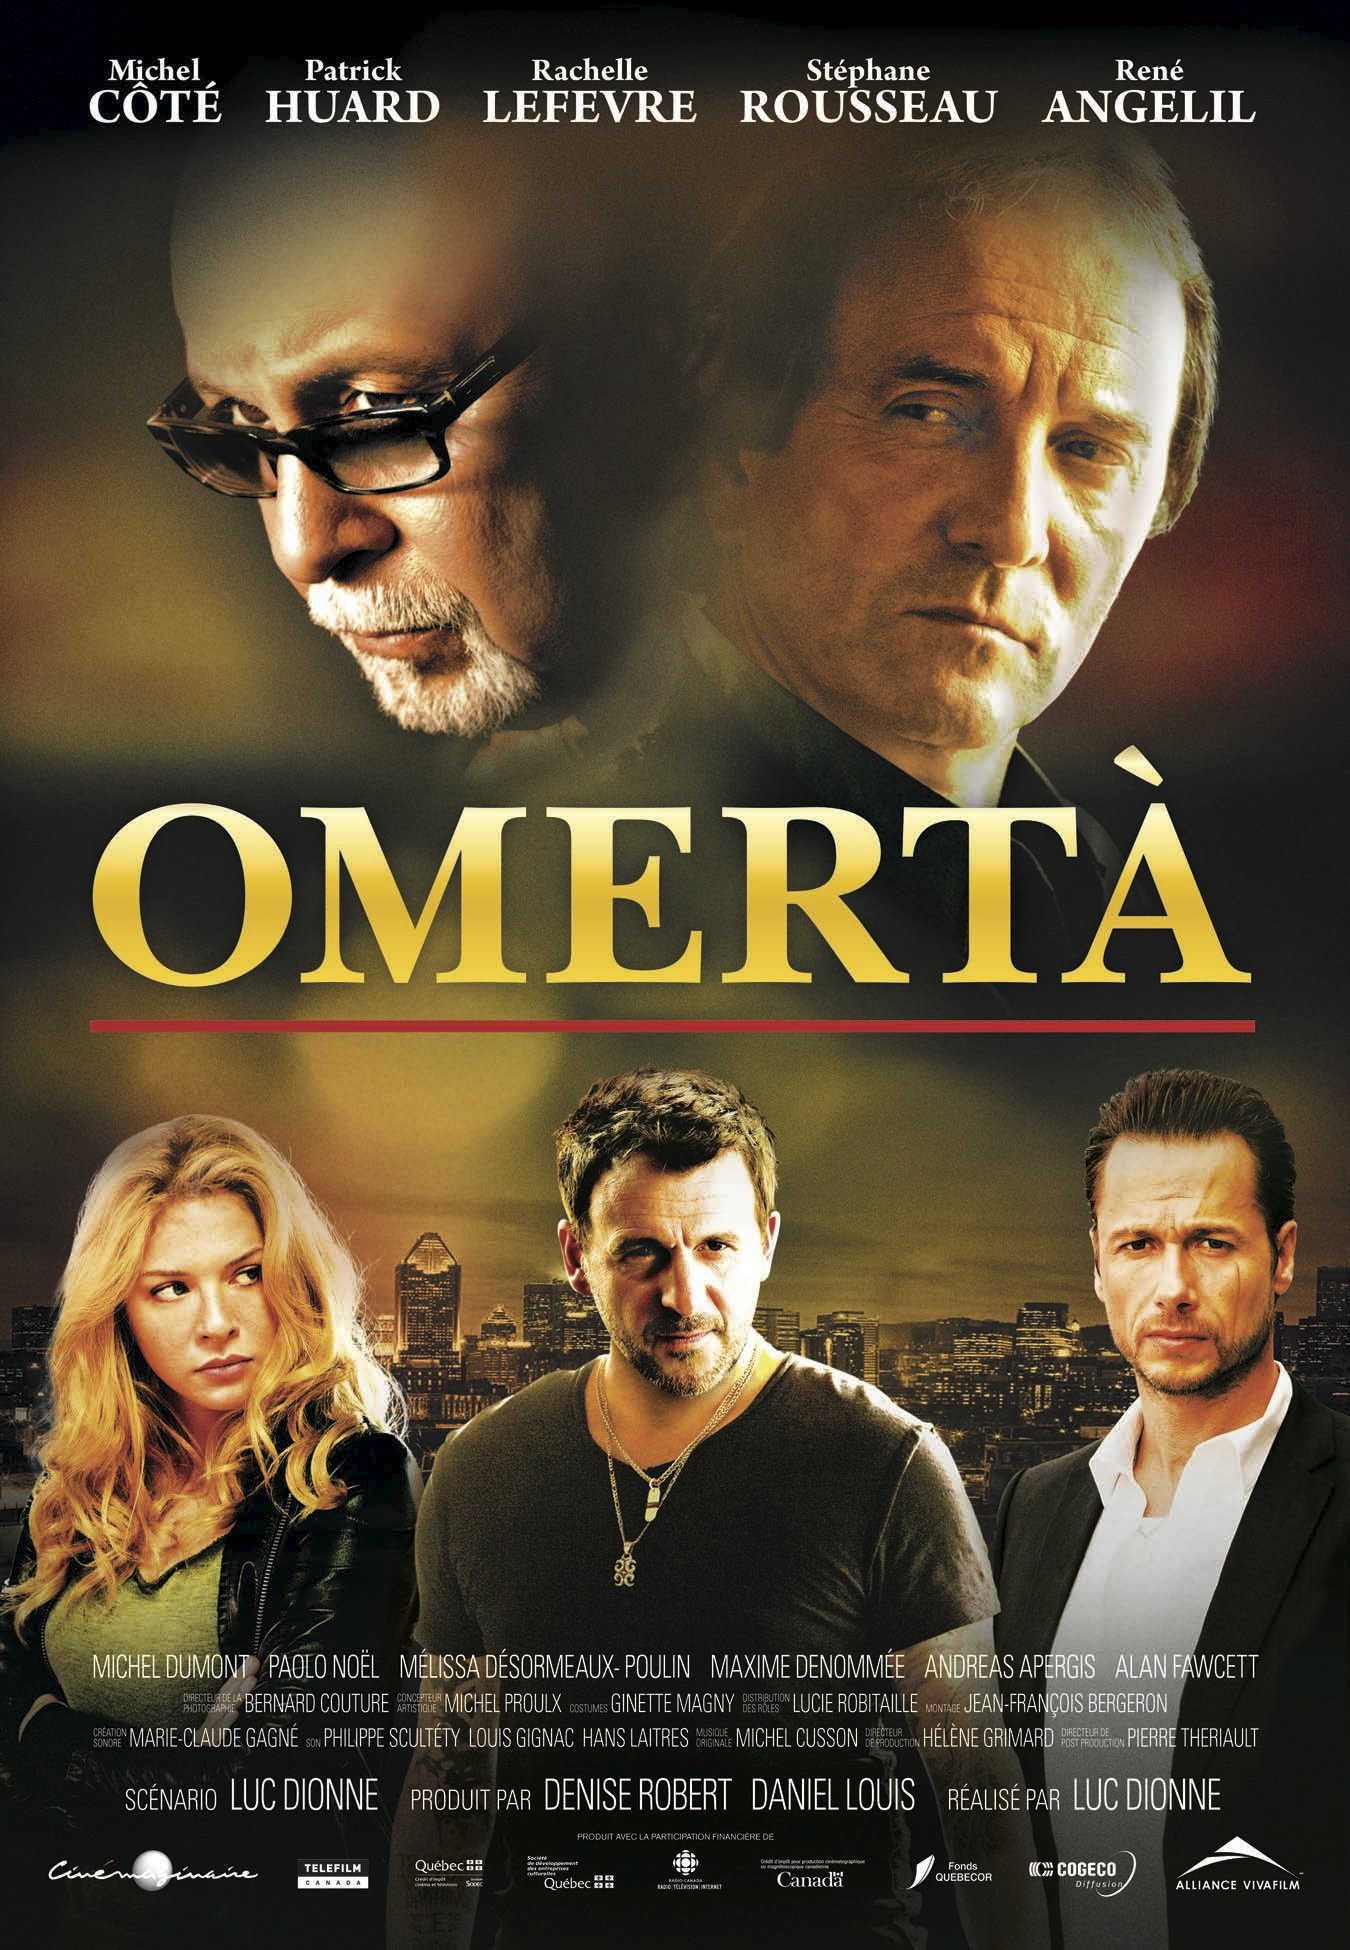 Poster of the movie Omertà